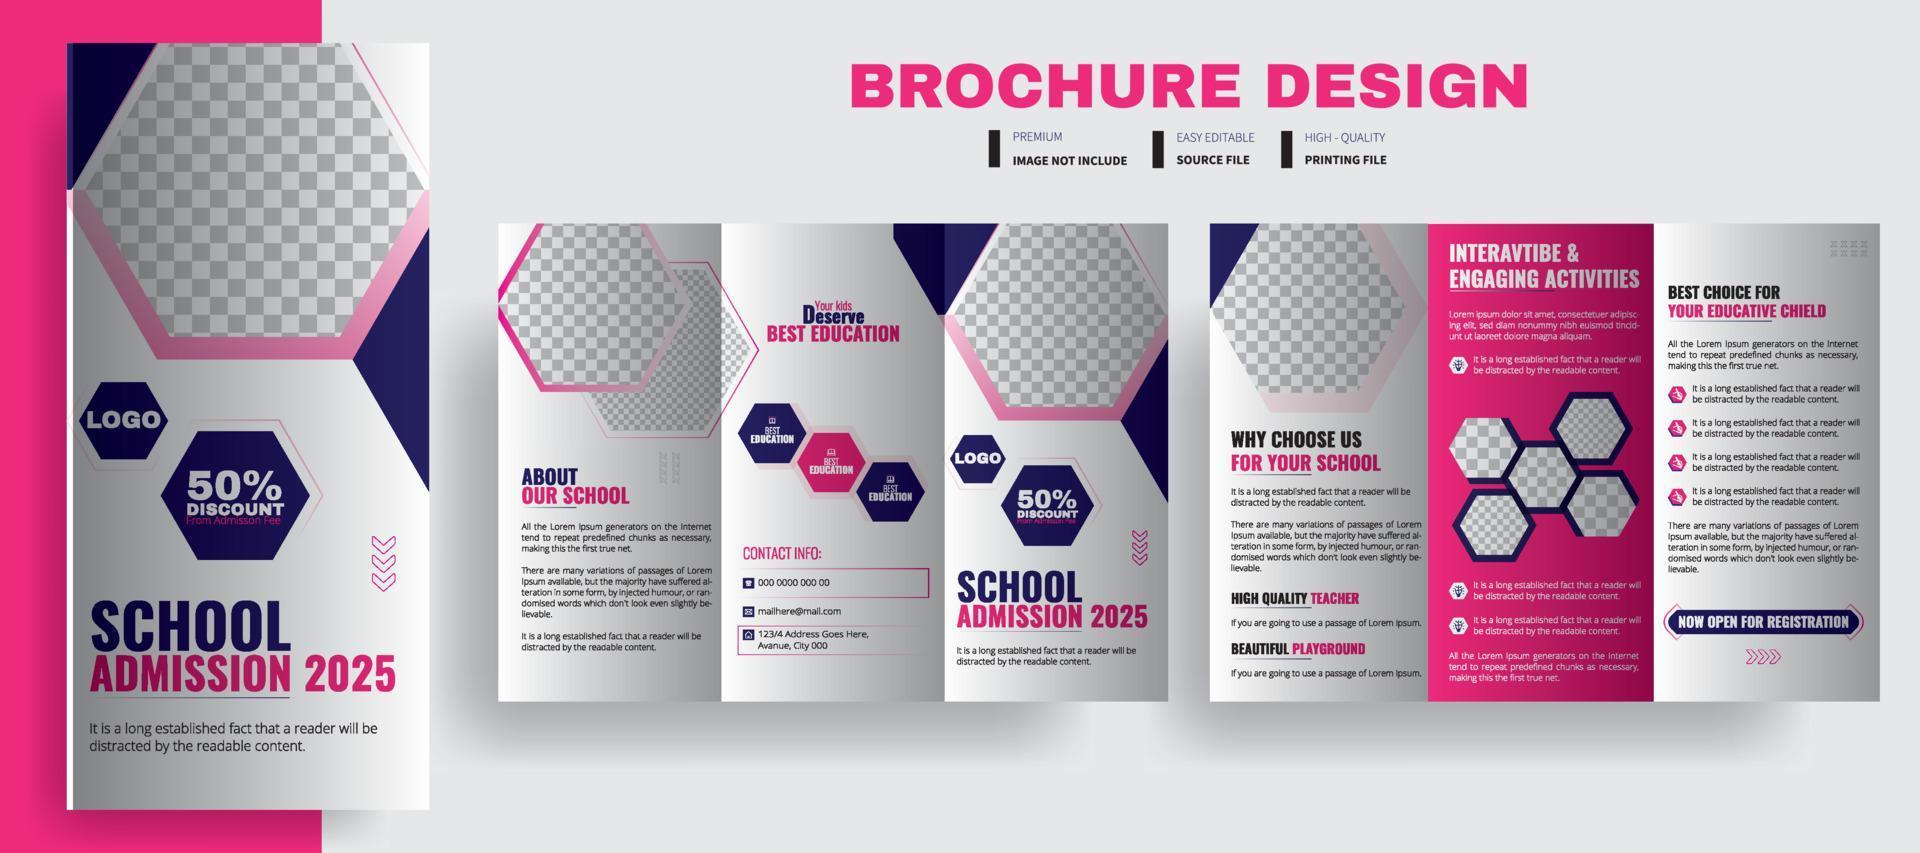 School Admission Tri-Fold Brochure Design Template Vector Illustration, Anual university brochure design for promotion, Corporate business template for tri fold flyer with rhombus square shapes, ads.